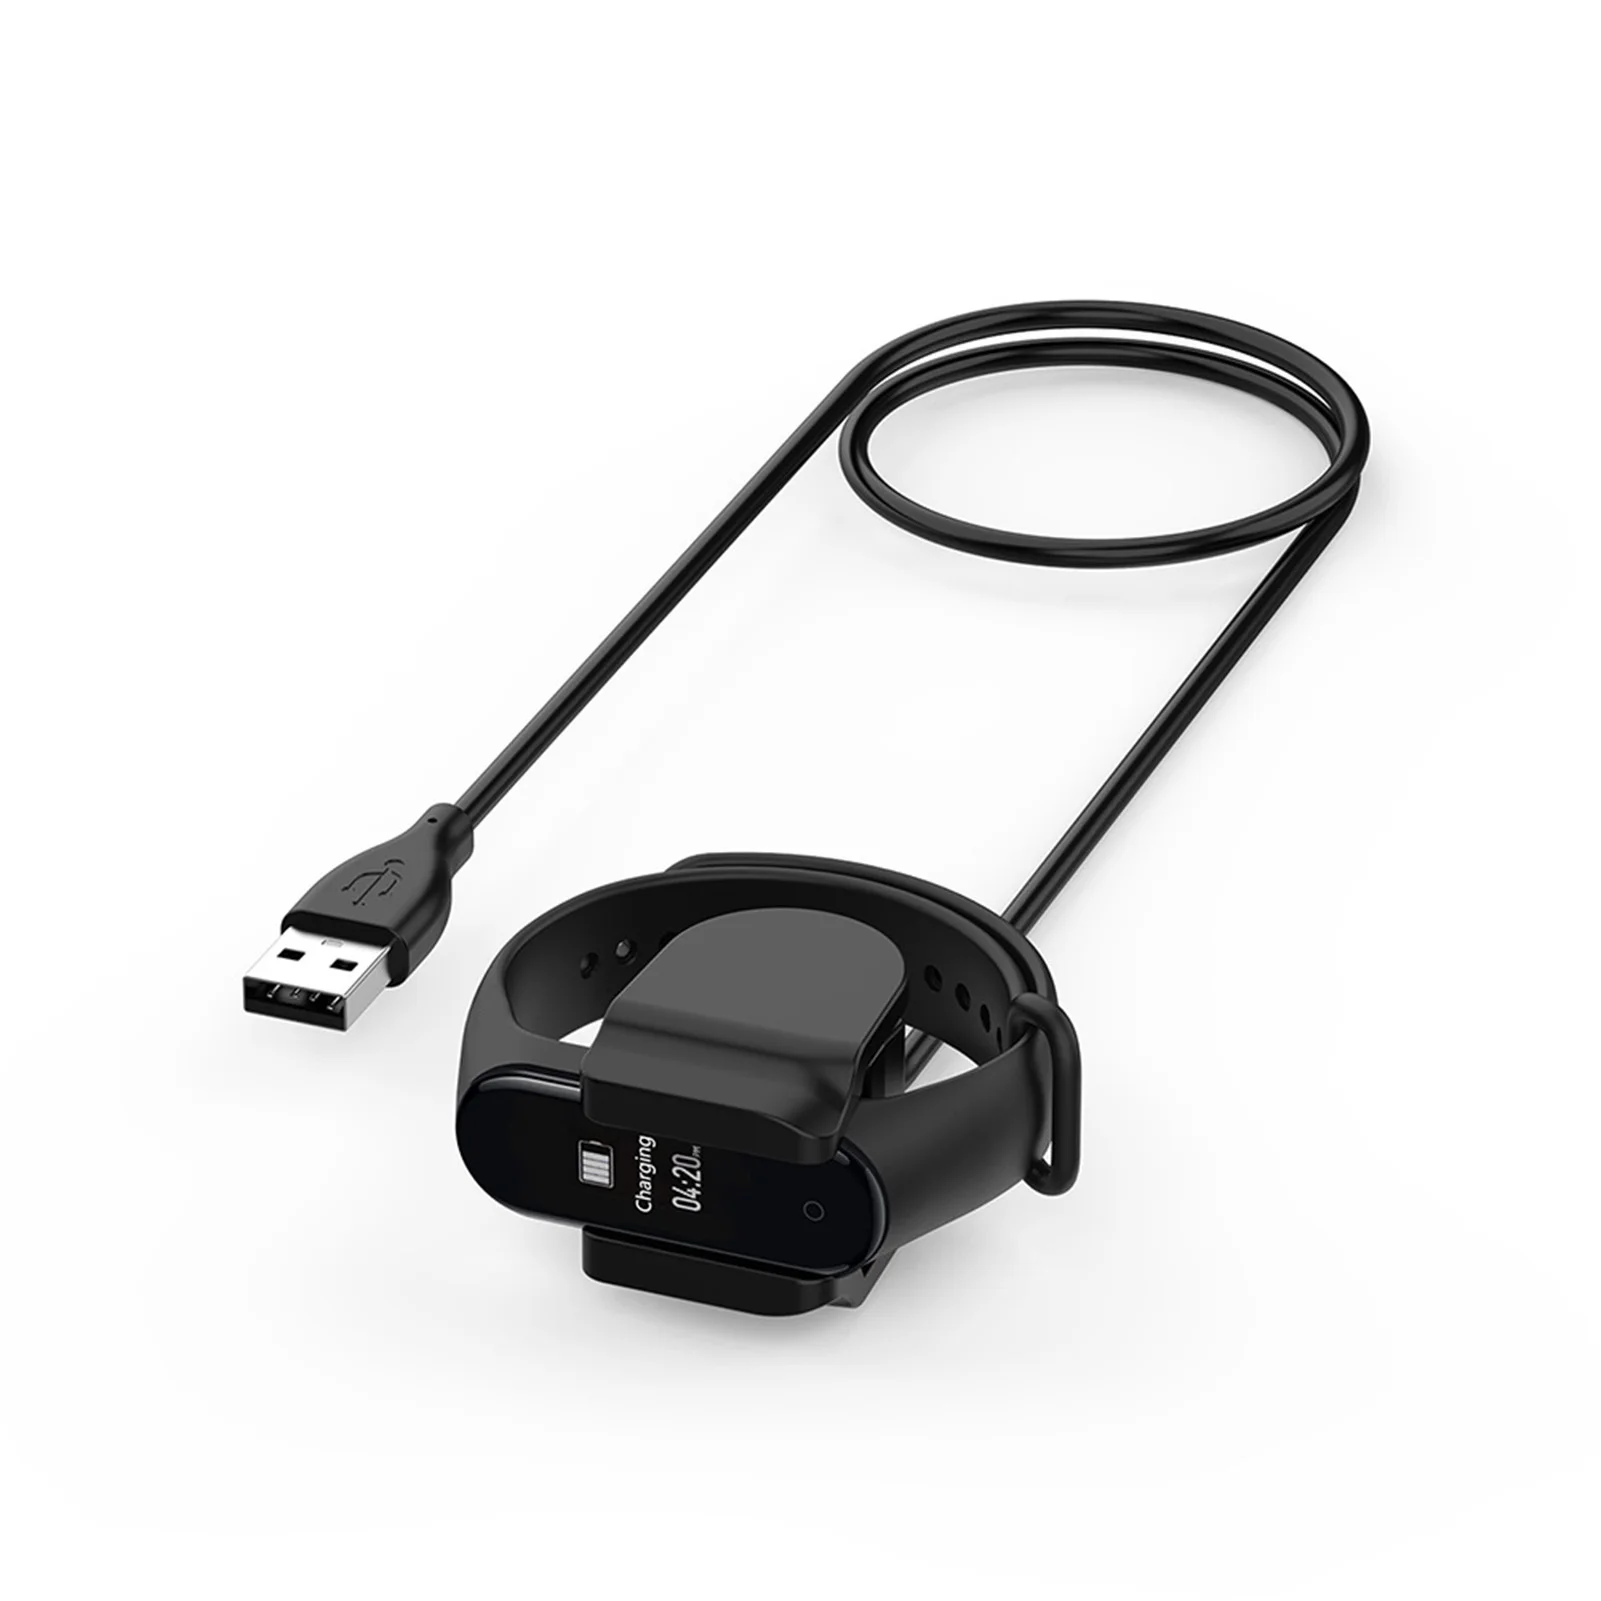 

USB Charger Wire forXiaomi Mi Band 2/3/4/5 Smart Wristband Bracelet Replacement Dock Charging Cable Fast Charging Cable